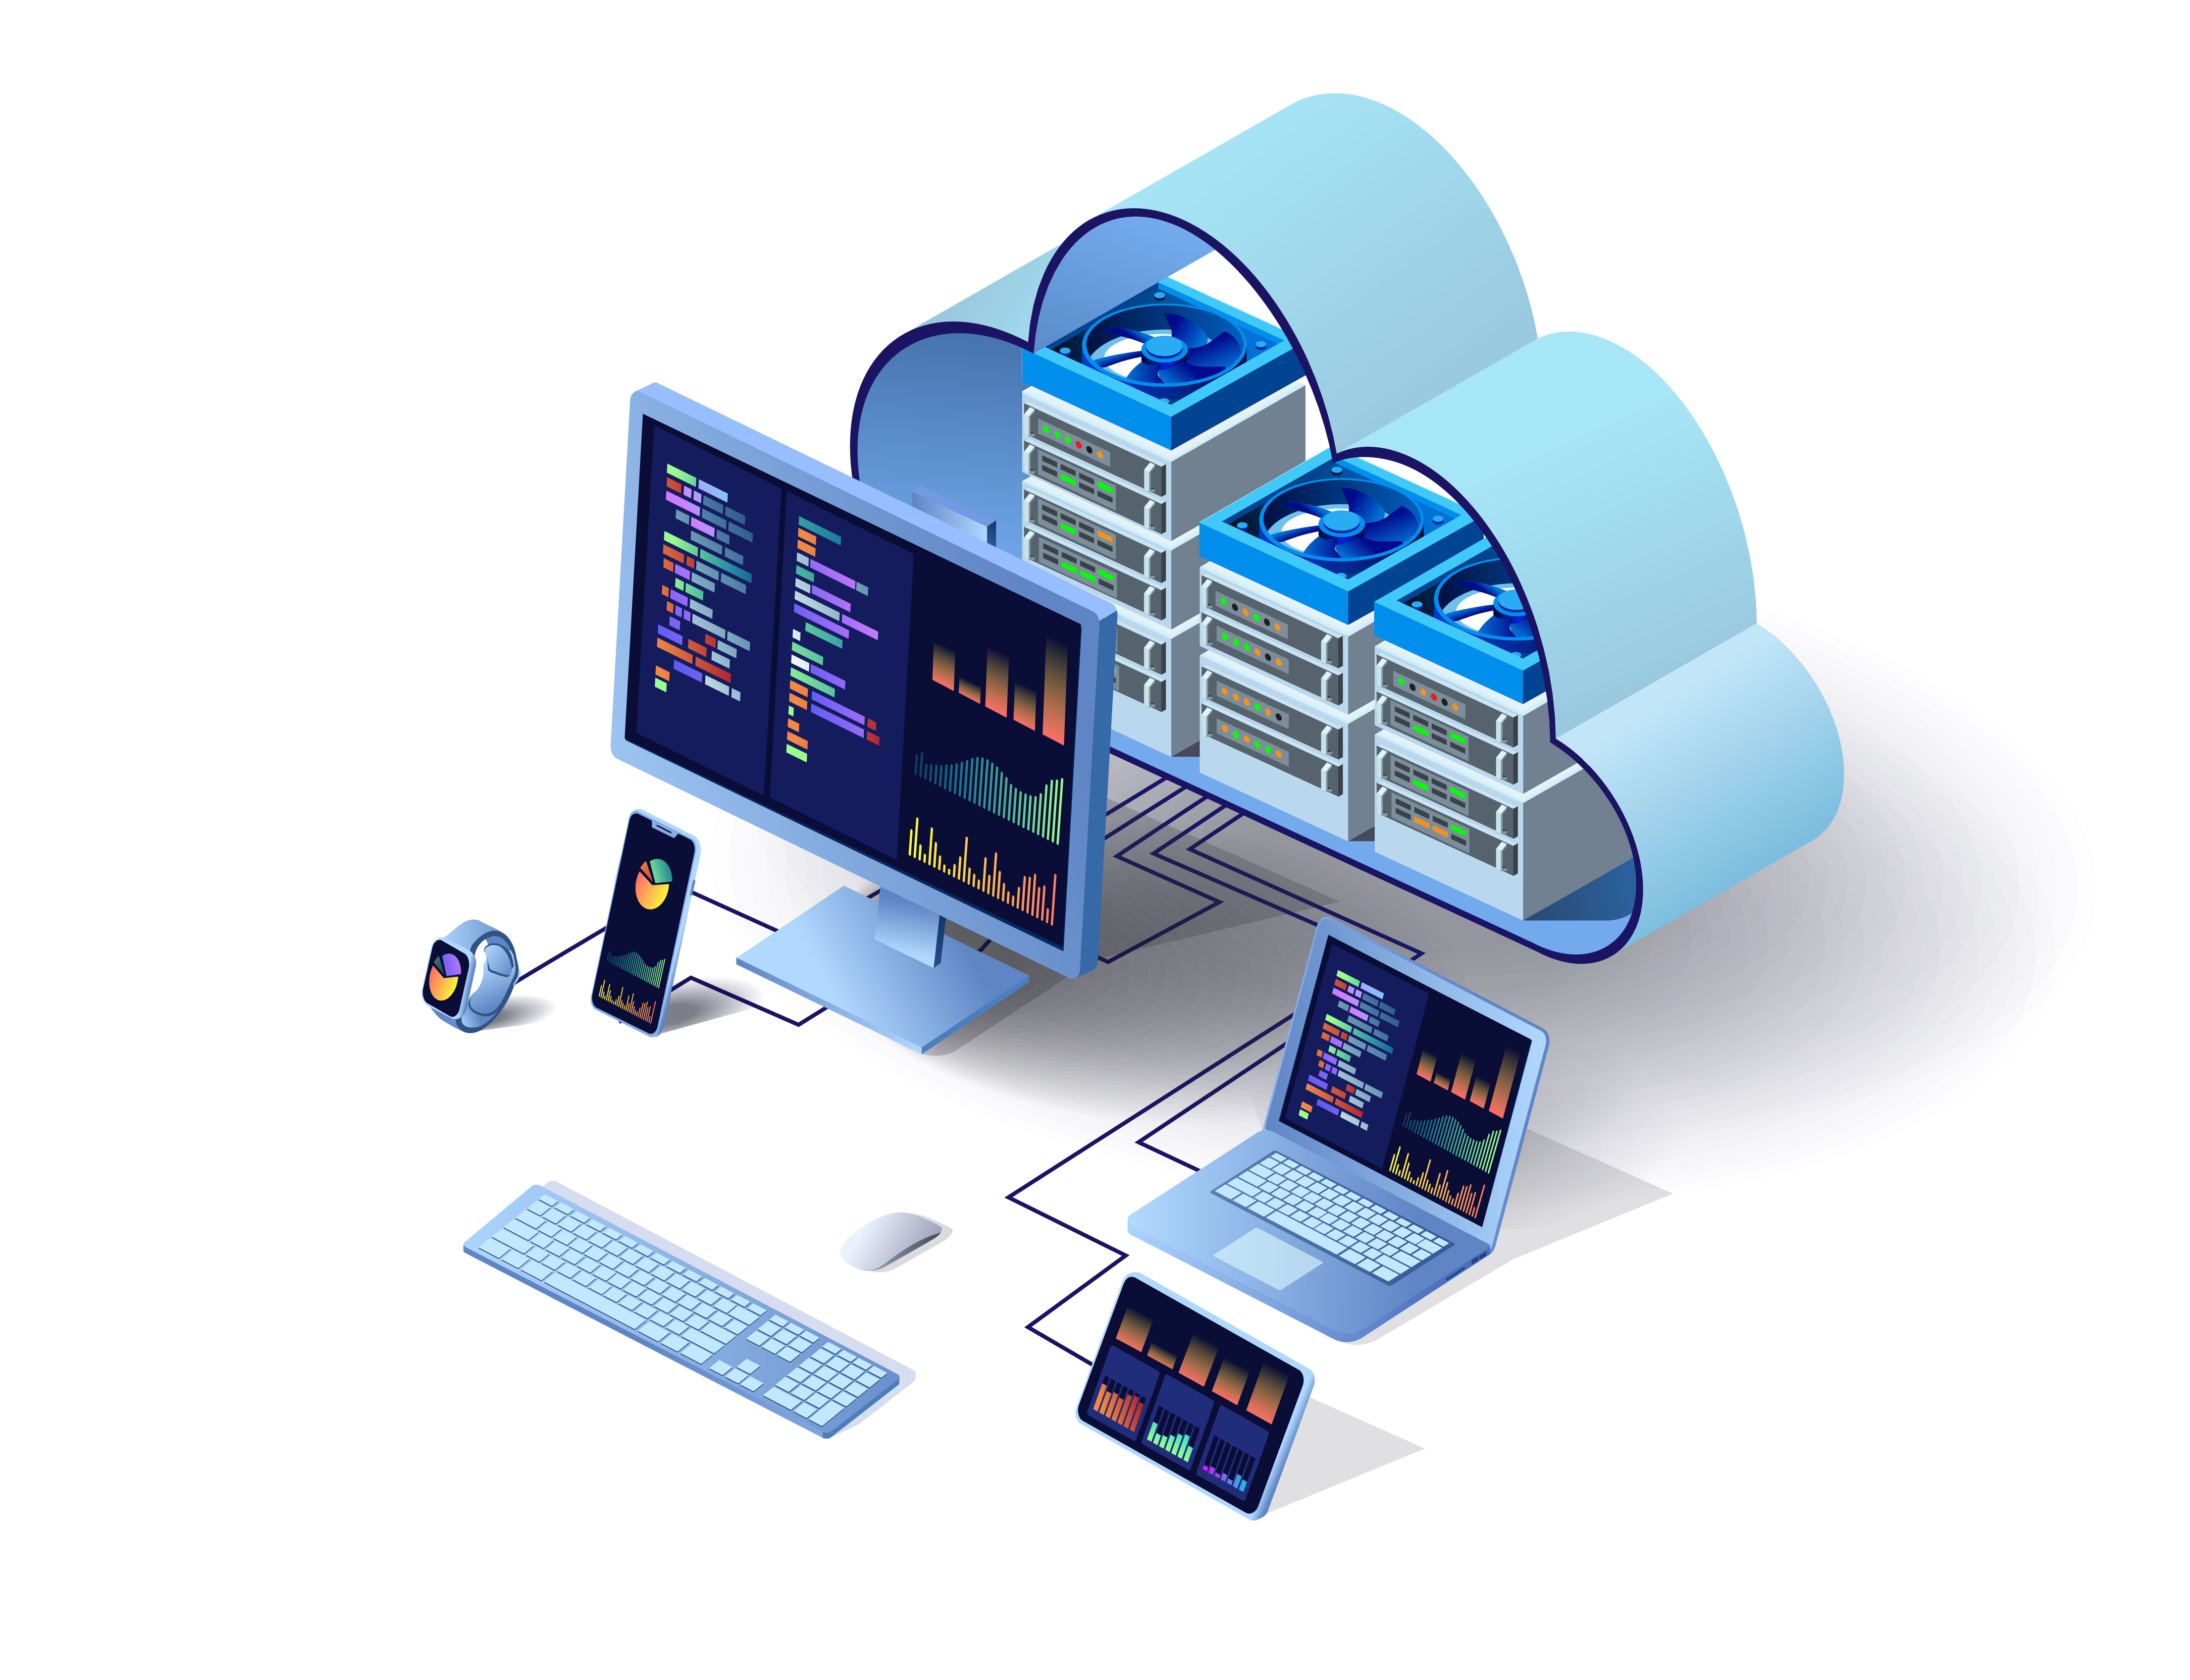 Cloud technology computing concept. Data center concept. Modern cloud technologies. Vector 3d isometric illustration network with computer, laptop, tablet, and smartphone. For web design, presentation